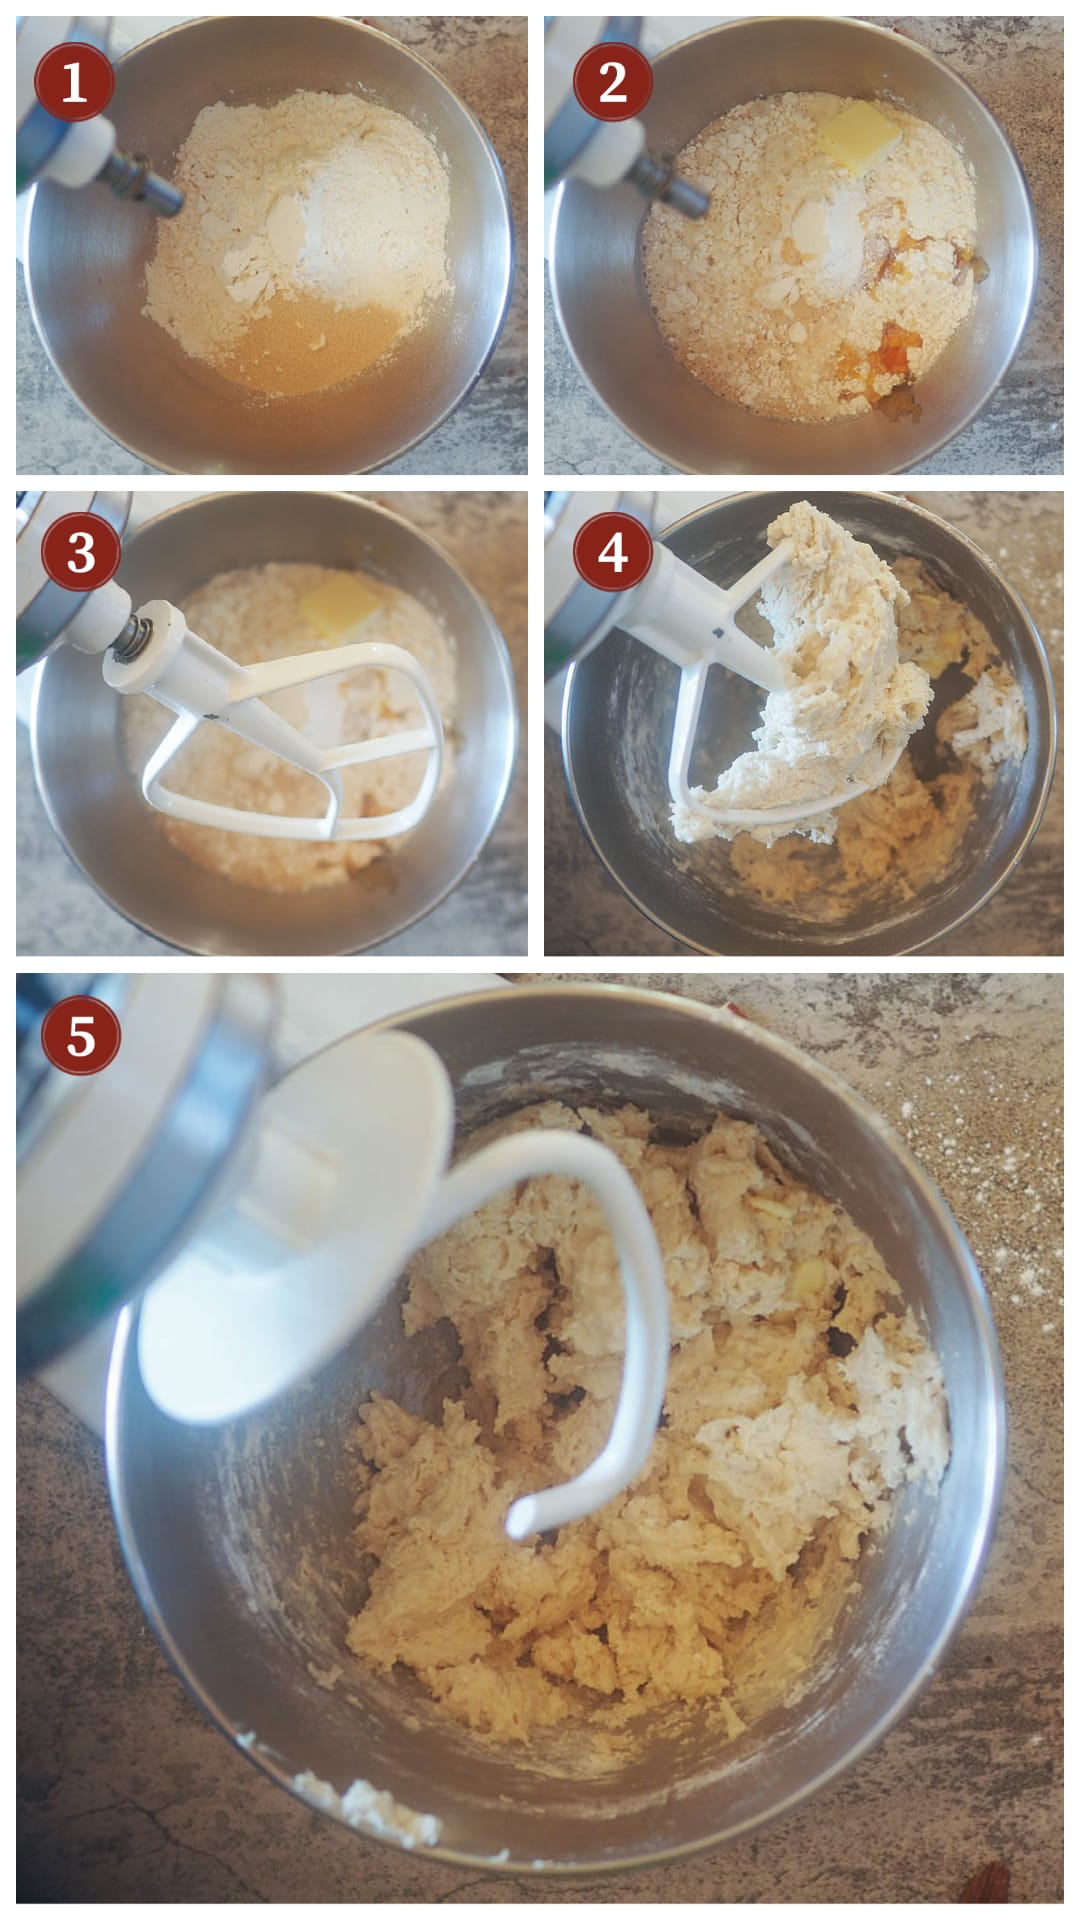 A collage of images showing how to make cinnamon roll dough, steps 1 - 5.